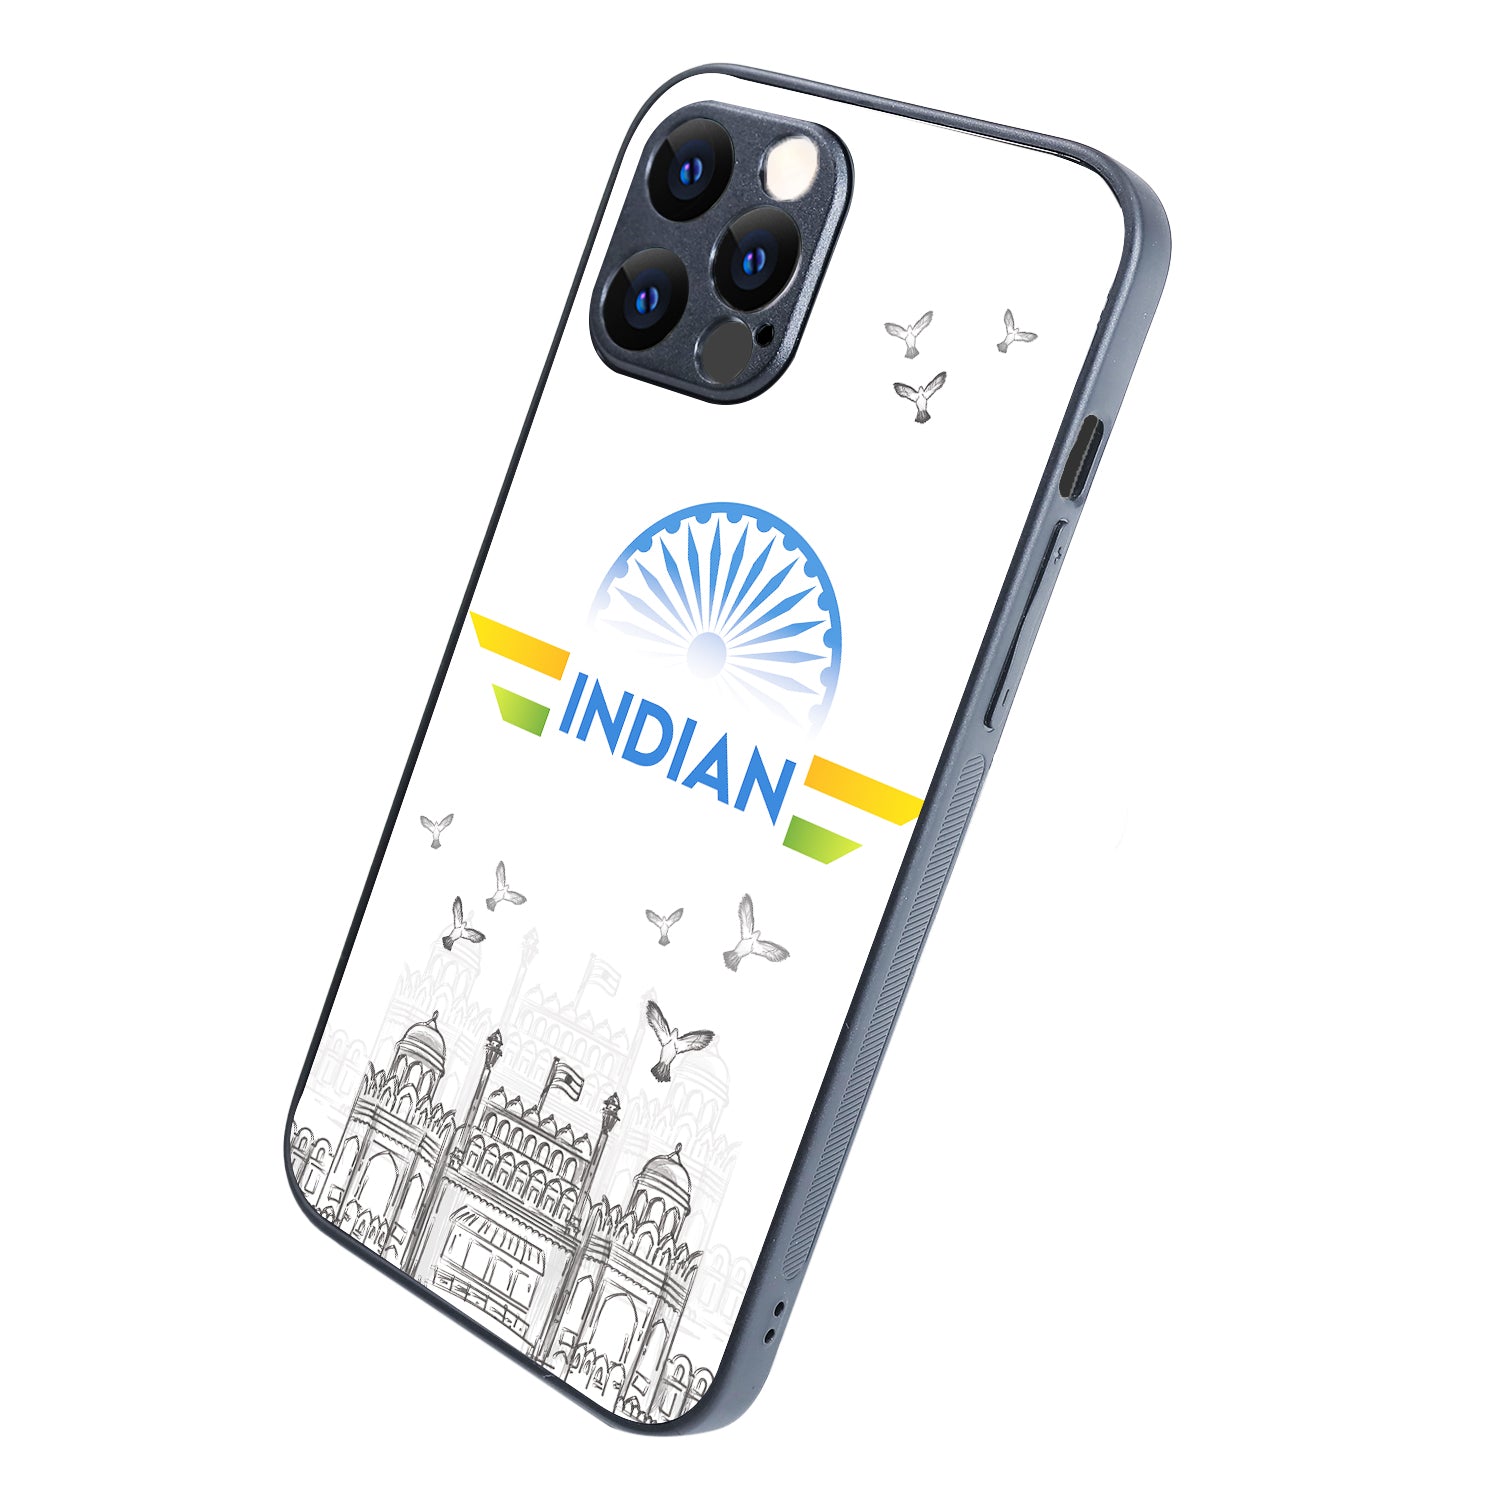 Indian iPhone 12 Pro Max Case